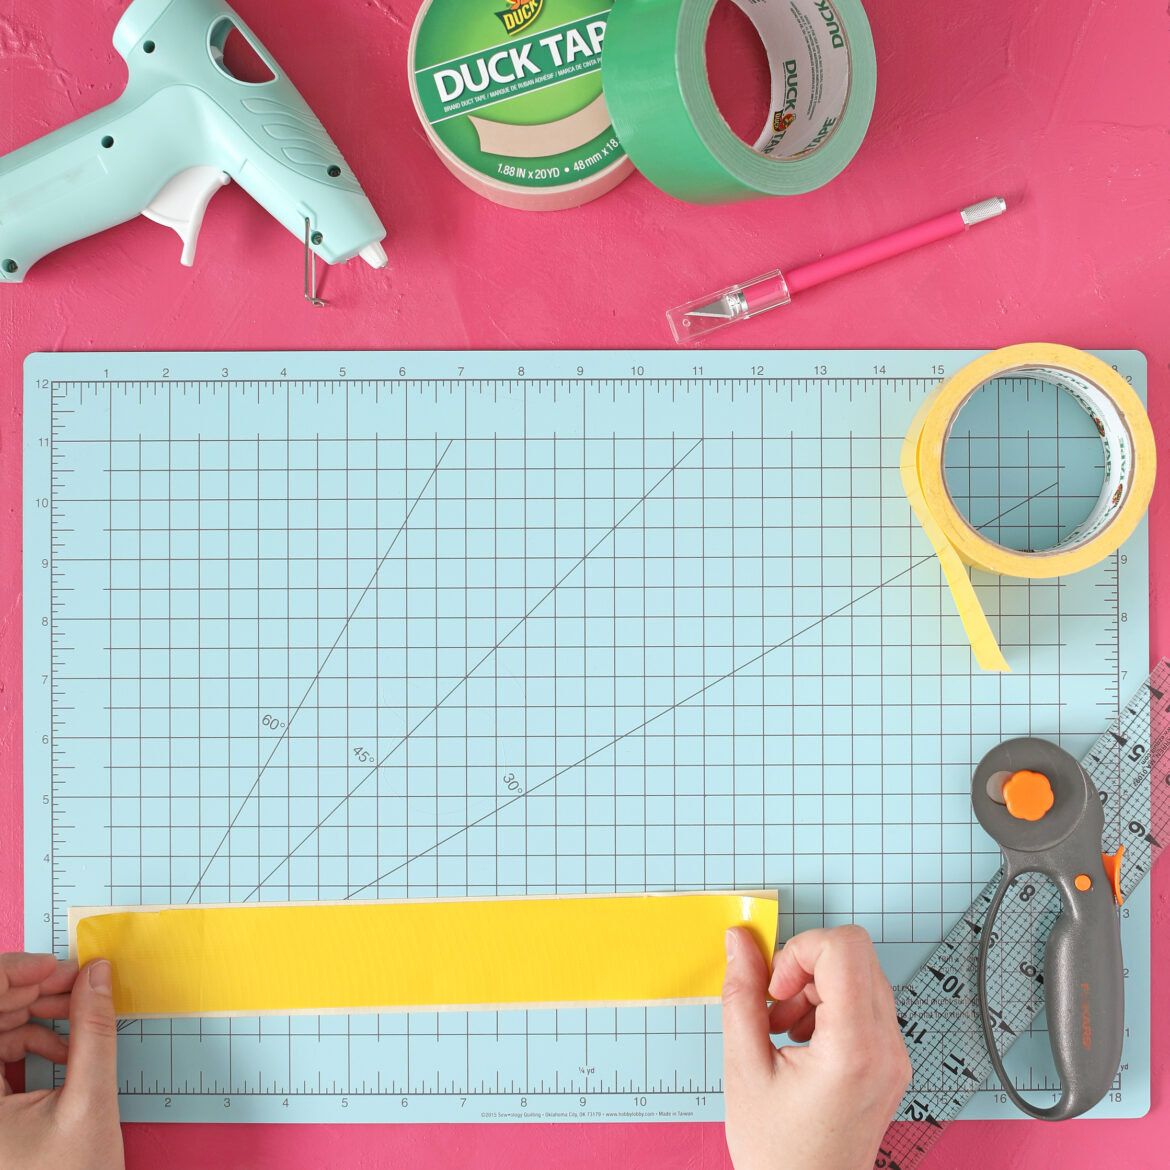 One strip of yellow Duck Tape being laid flat on a crafting board.